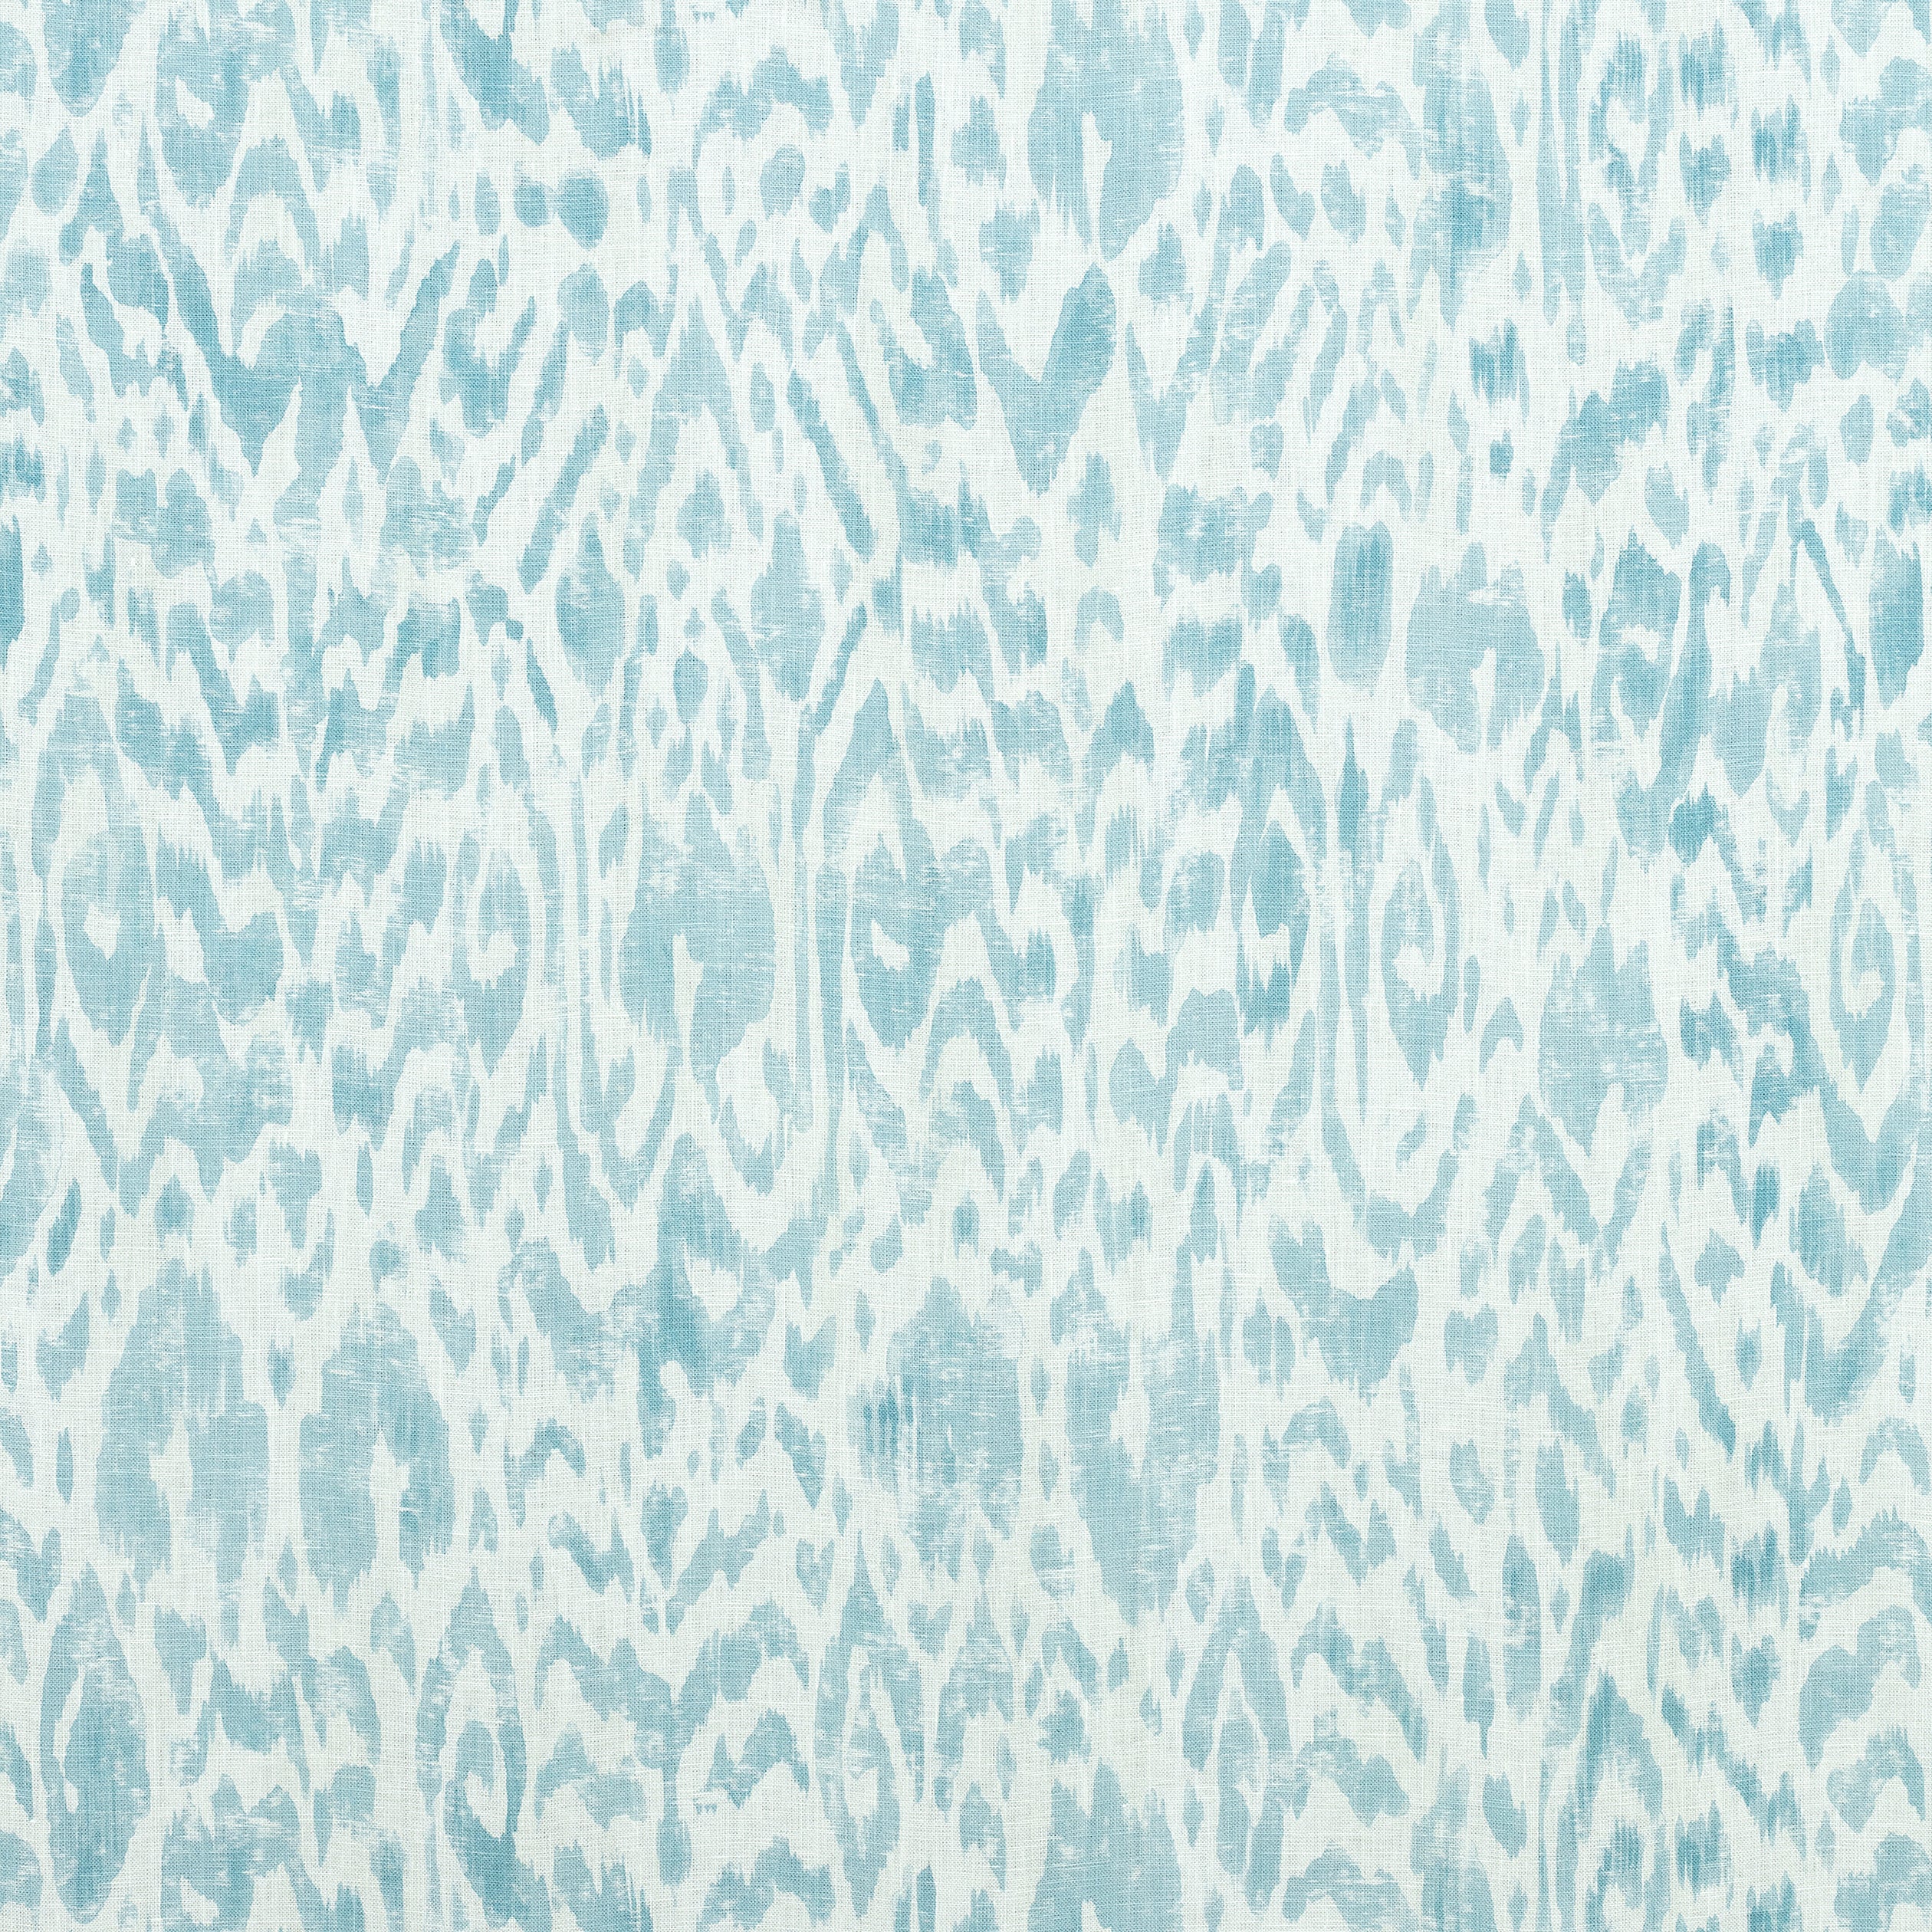 Carlotta fabric in aqua color - pattern number F975483 - by Thibaut in the Dynasty collection